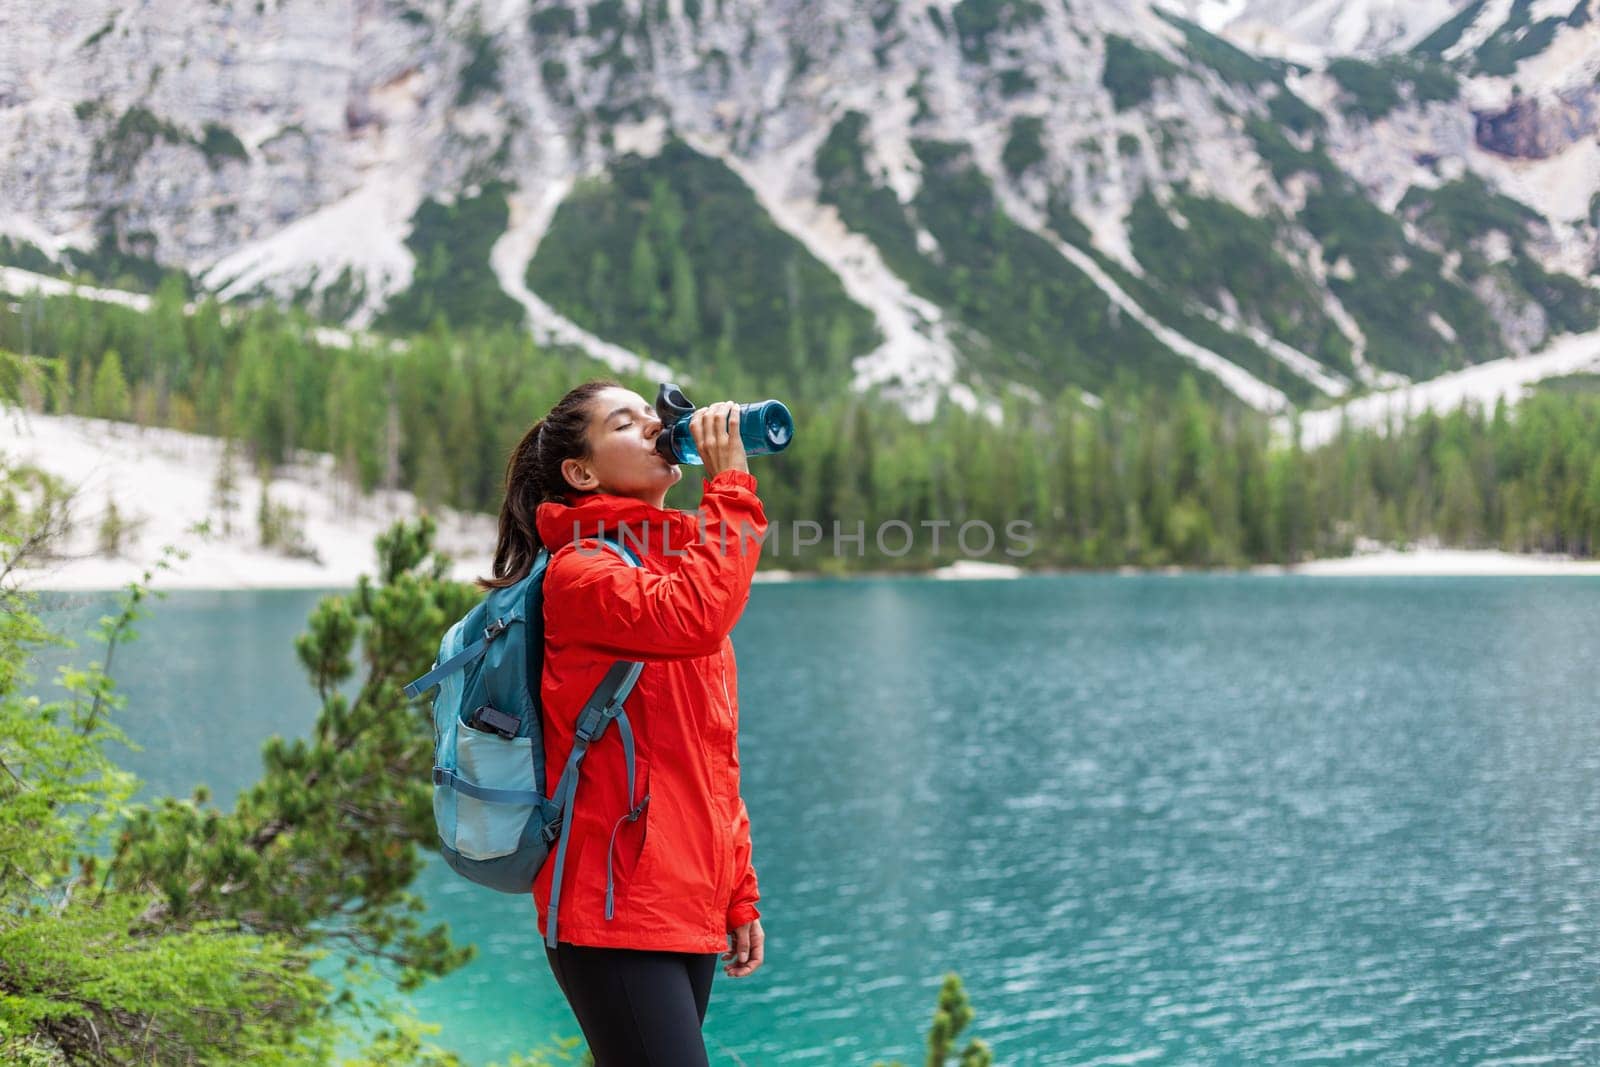 Hydration while on track. Attractive woman hiker in red raincoat drinking water near a lake and mountains by AndreiDavid